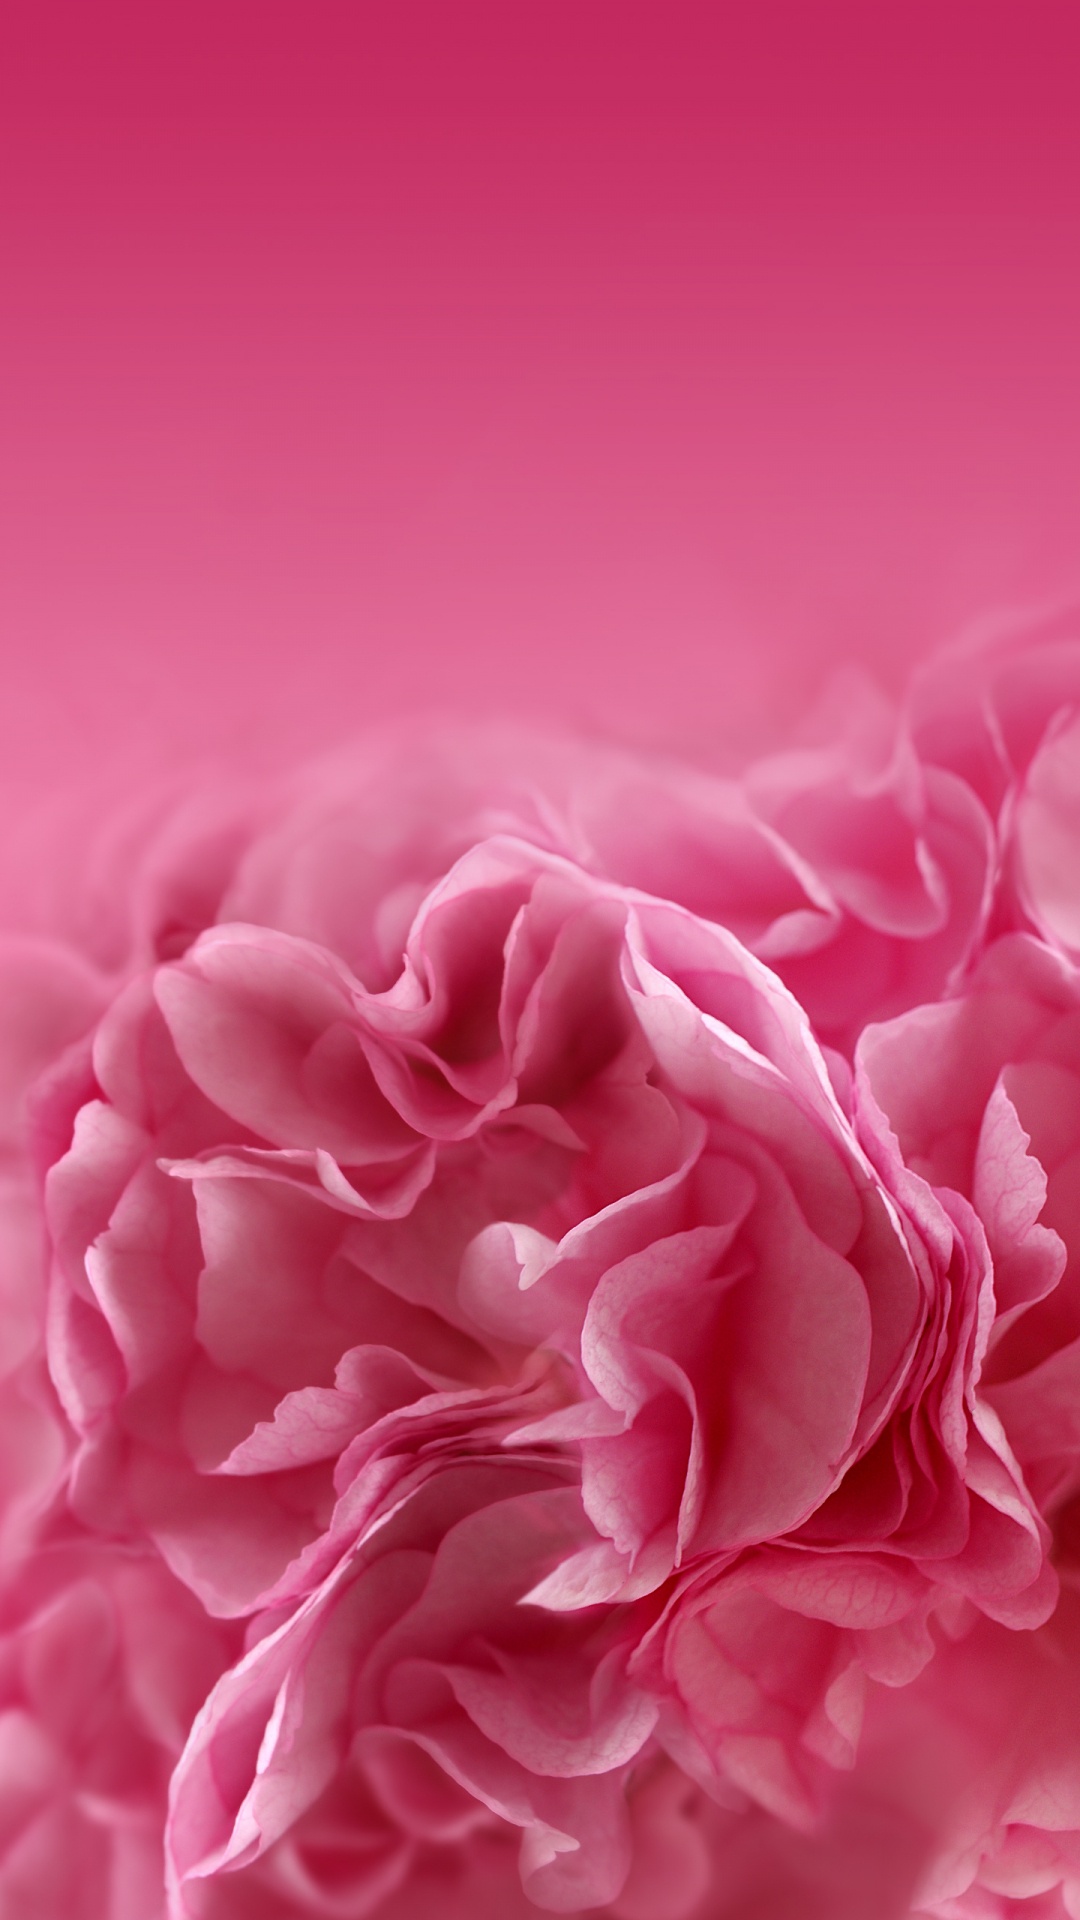 Pink Rose in Close up Photography. Wallpaper in 1080x1920 Resolution